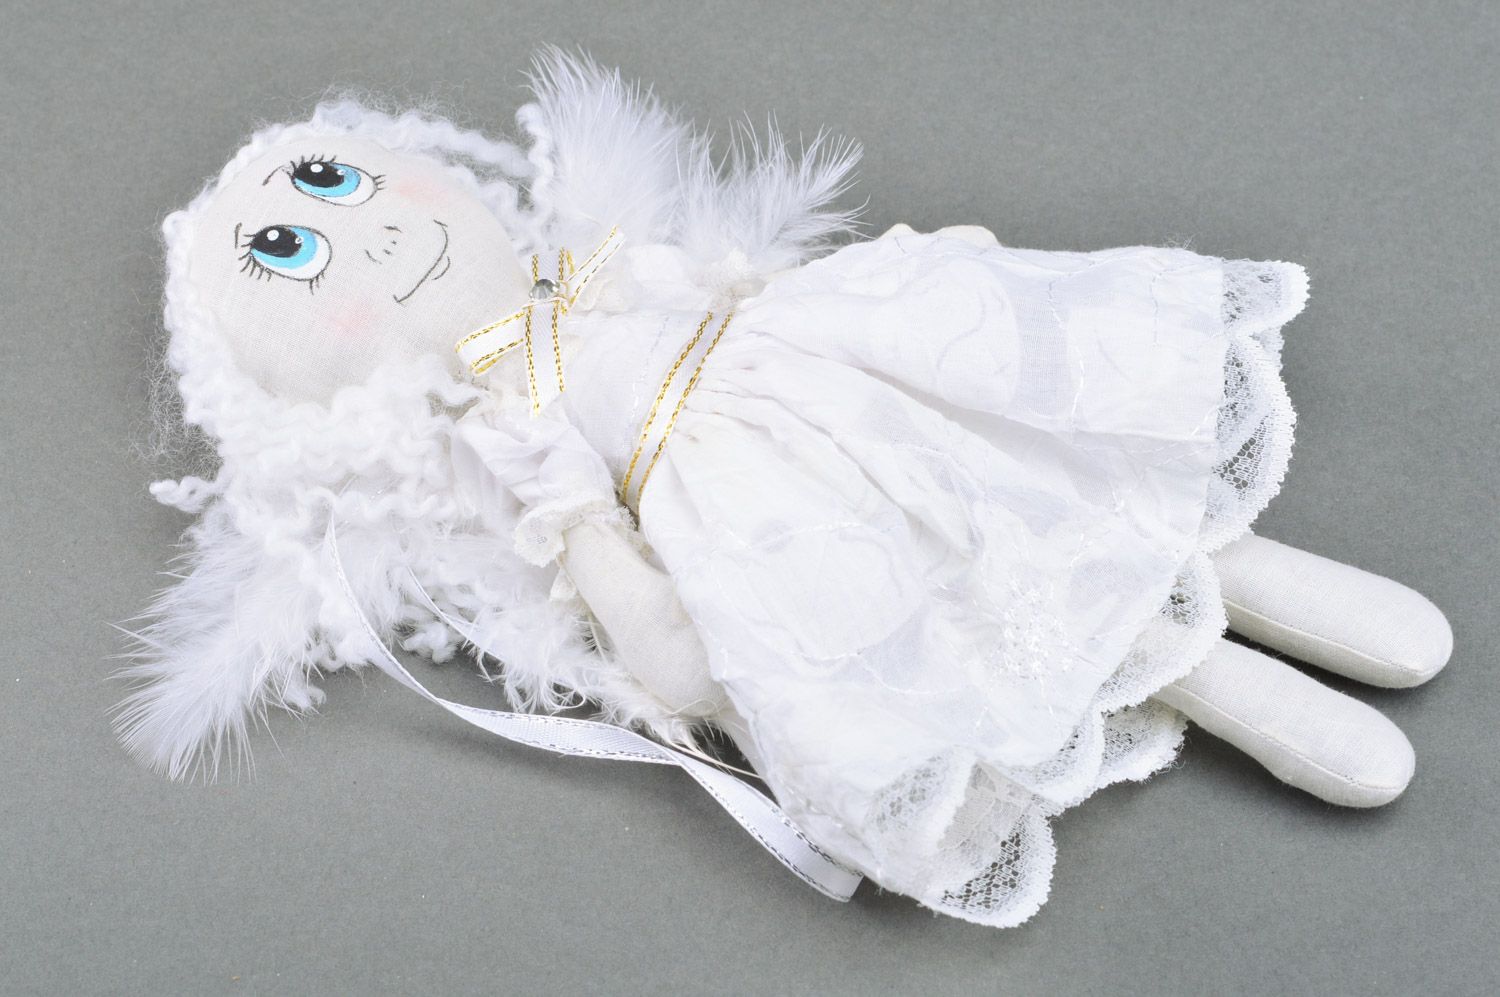 Handmade white fabric soft doll of average size with wings made of feathers photo 2